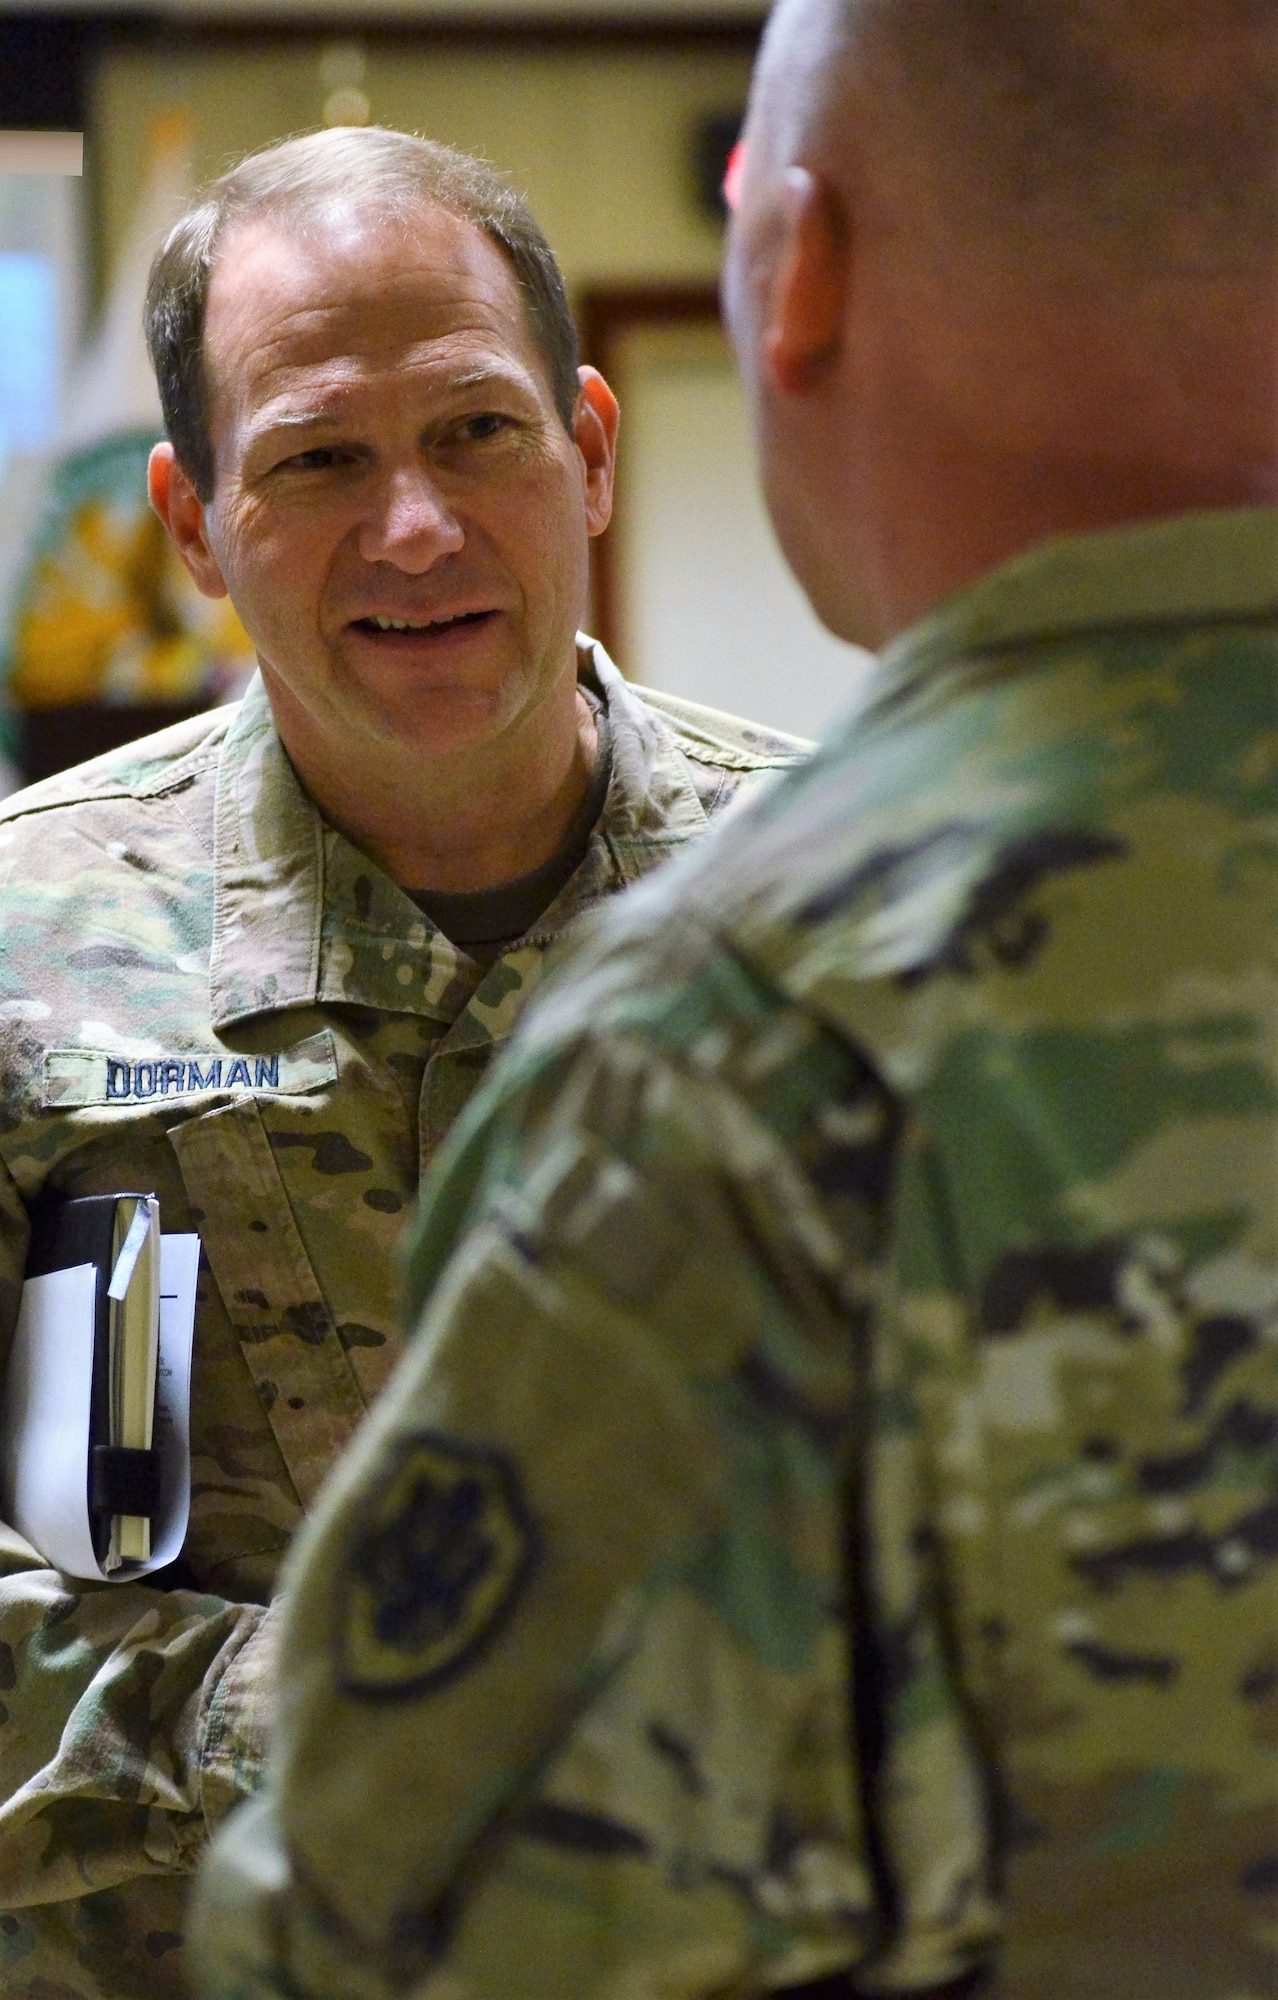 U.S. Army Major General Edward Dorman, Director of Logistics and Engineering for U.S. Central Command, speaks with a fellow logistician at the Joint Logistics Coordination Board at Al Udeid Air Base, Qatar on 9 May, 2018. Dorman urged participants to stay focused on sustaining the fight and setting the theater as a means to support military operations. (U.S. Air Force photo by Senior Airman Patrick Wyatt